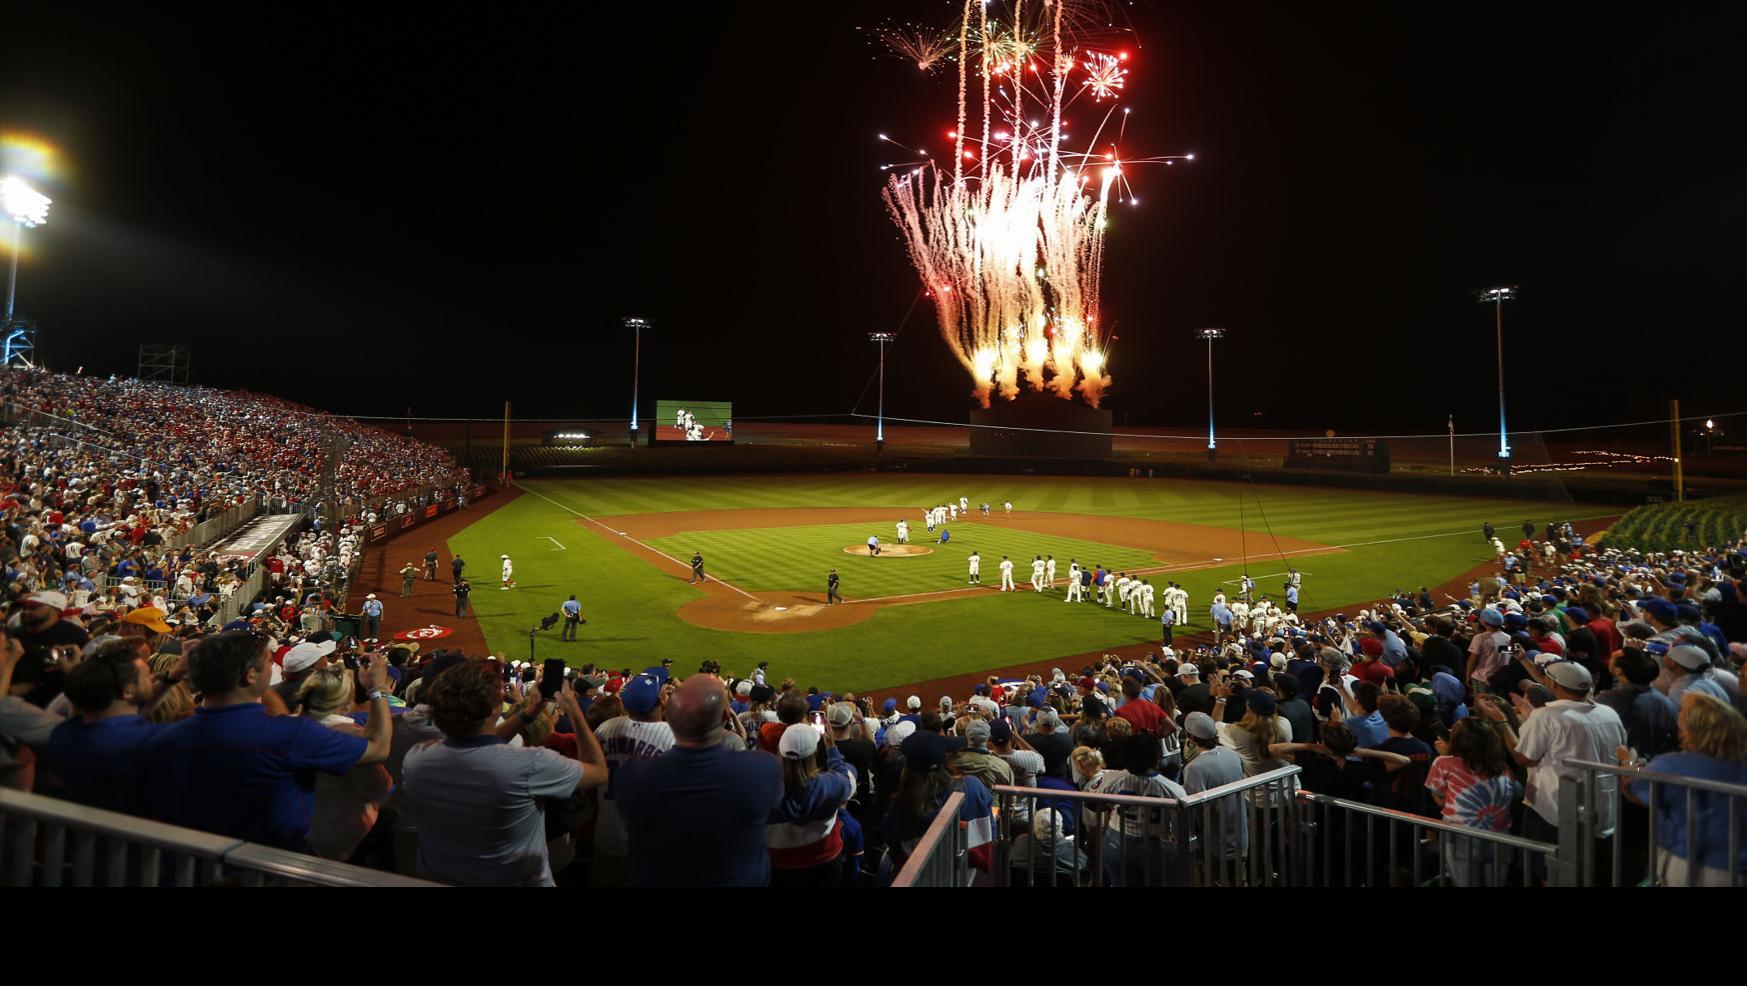 Field of Dreams site to host Minor League game before Cubs, Reds play